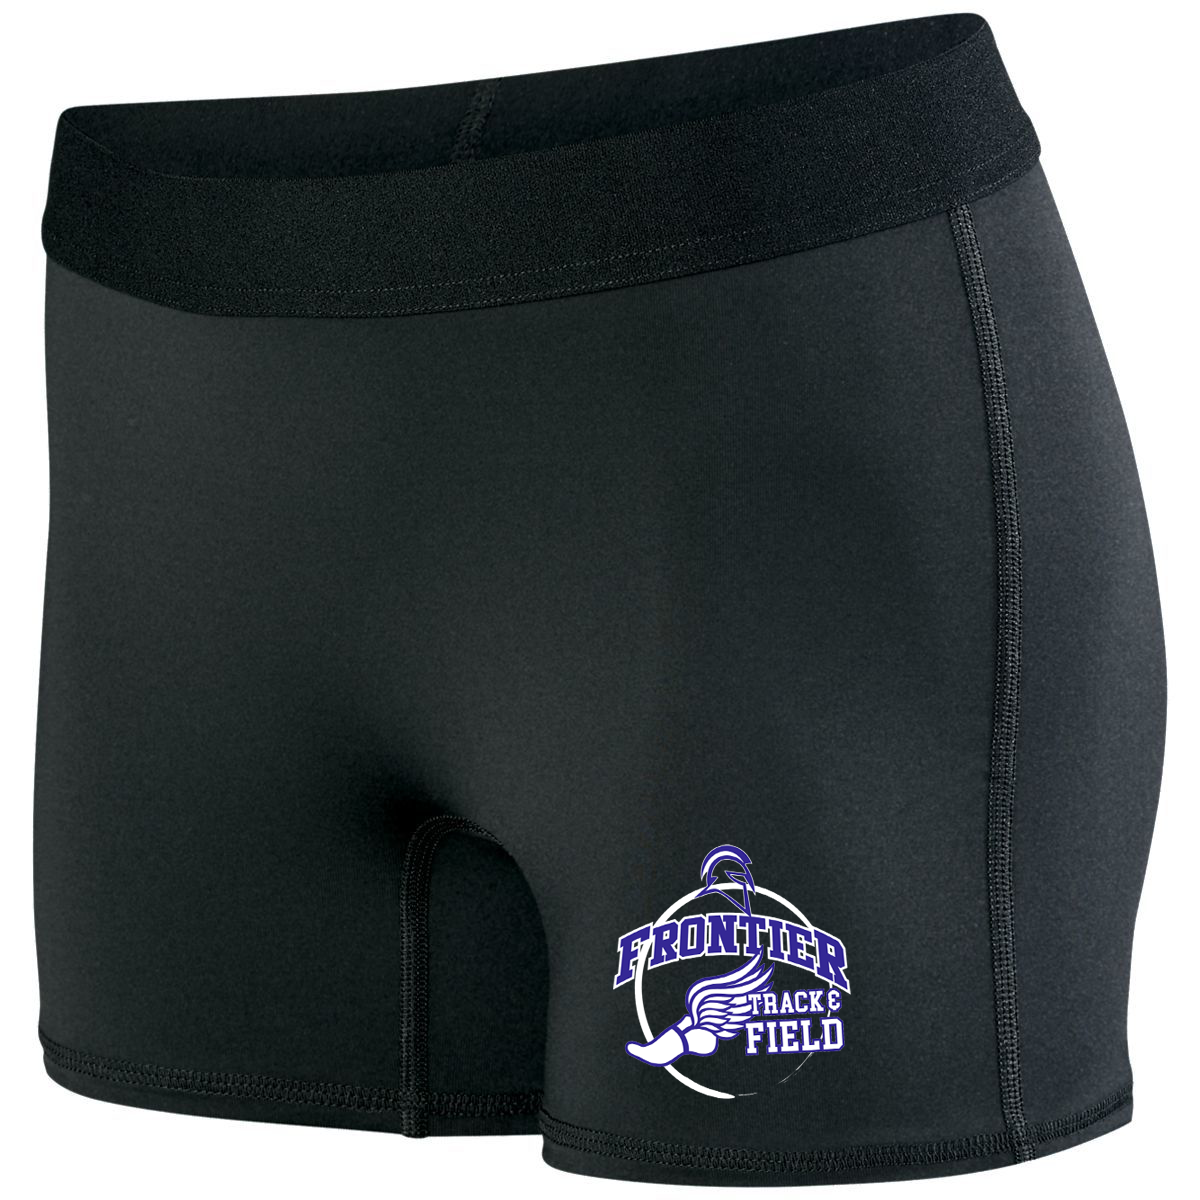 Frontier Track & Field Ladies Hyperform Fitted Shorts